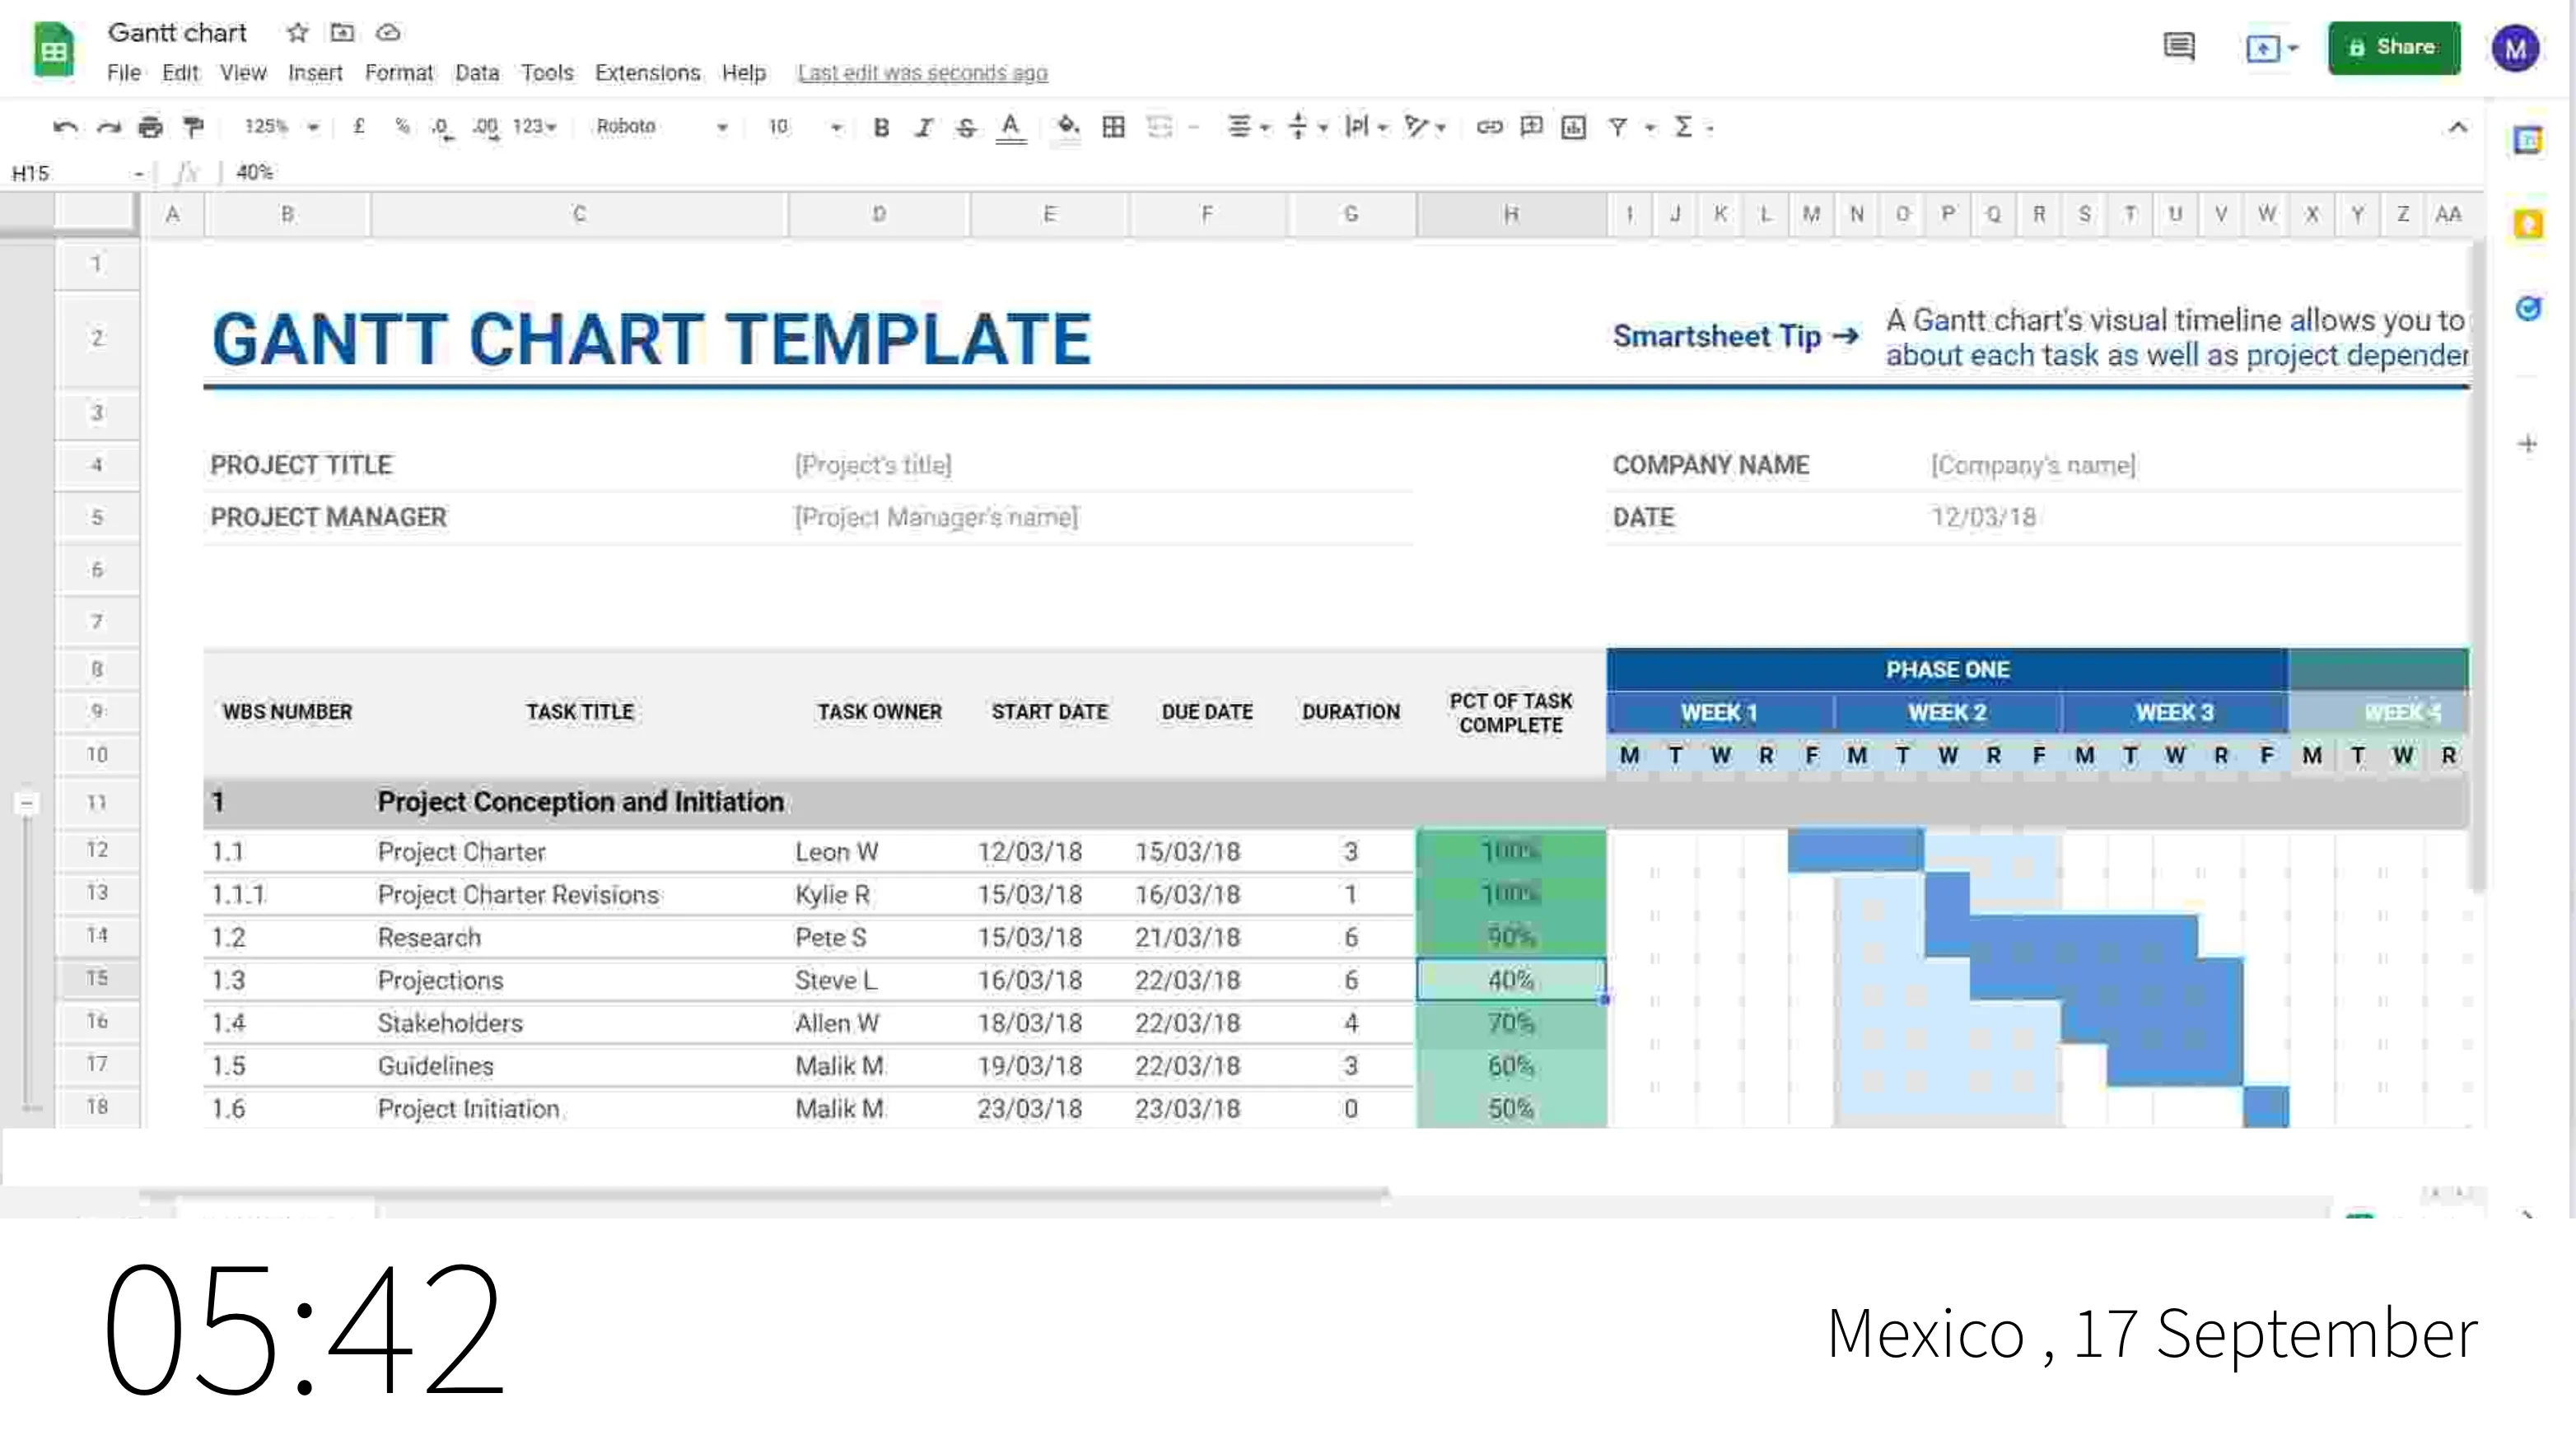 digital signage software interface showing compositon layout with Google Sheets app and Clock app contents